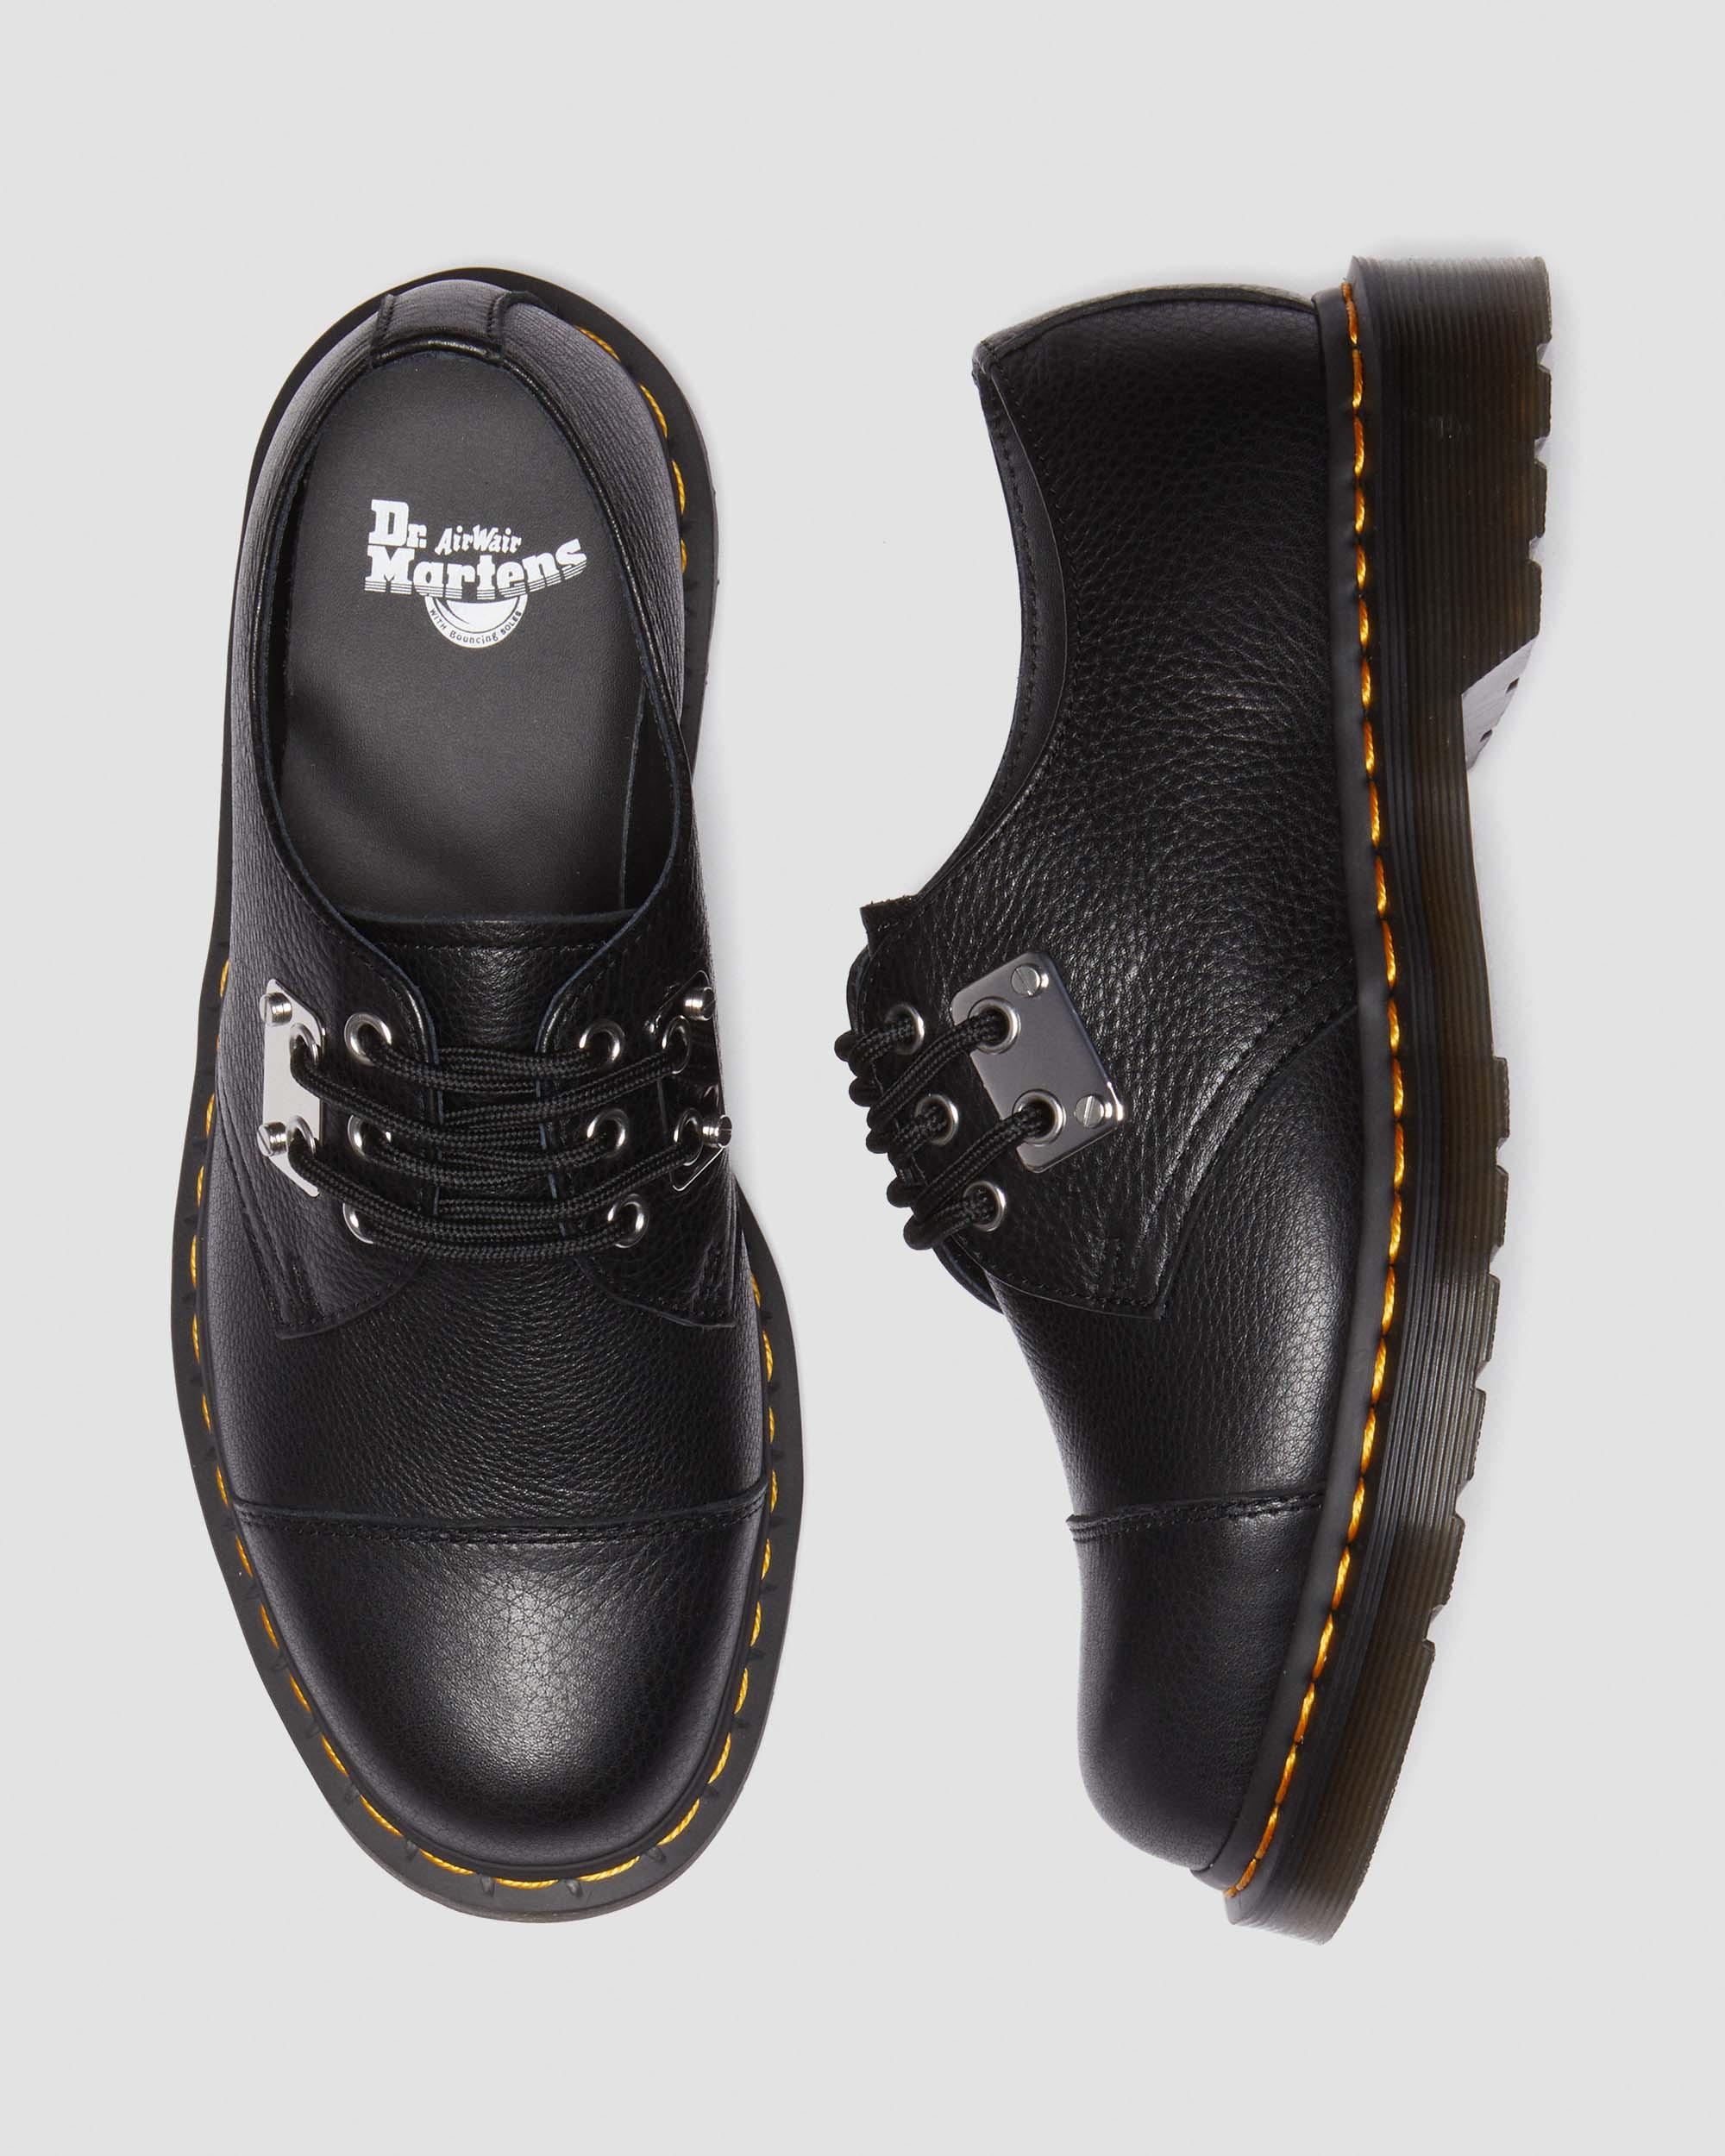 1461 Toe Plate Lunar Leather Oxford Shoes in Black